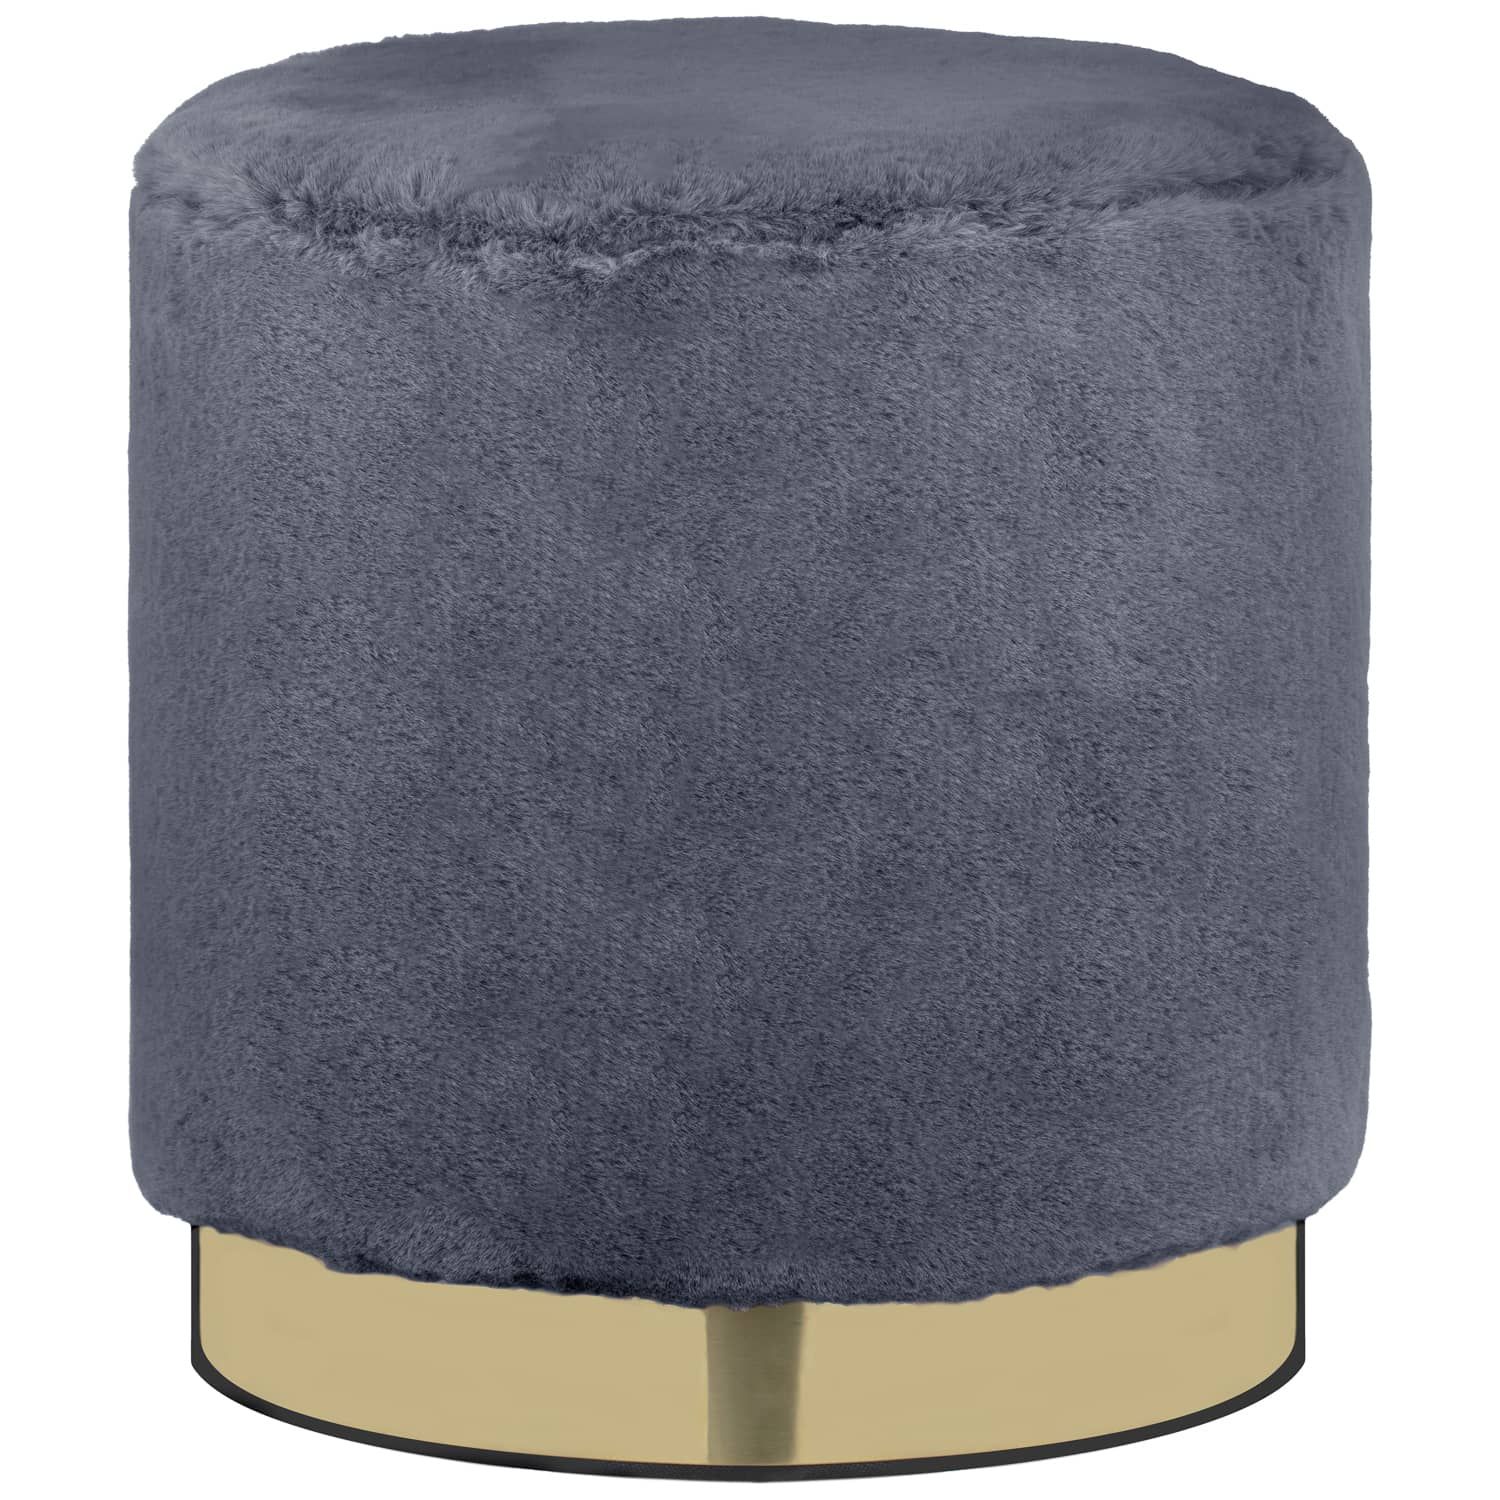 Faux Fur Footstool – Grey | Decorative Accessories – B&m Inside White Faux Fur Round Accent Stools With Storage (View 19 of 20)